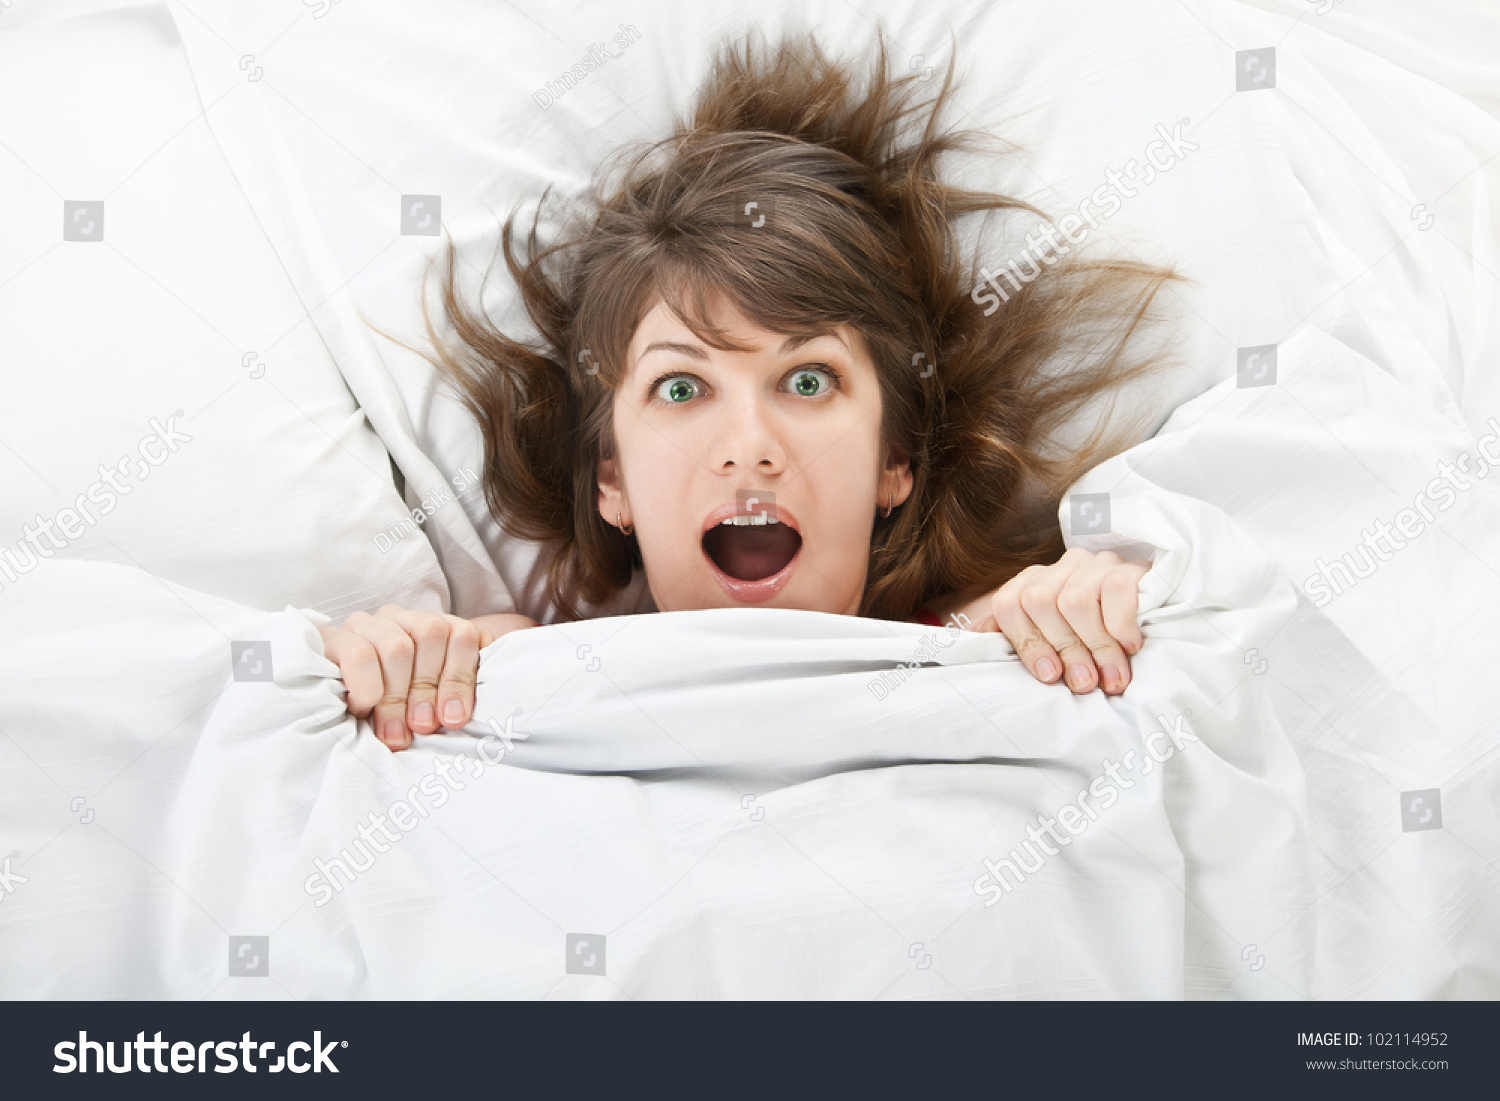 Beautiful Girl Bed Home Hiding Under Stock Photo 102114952 - Shutterstock